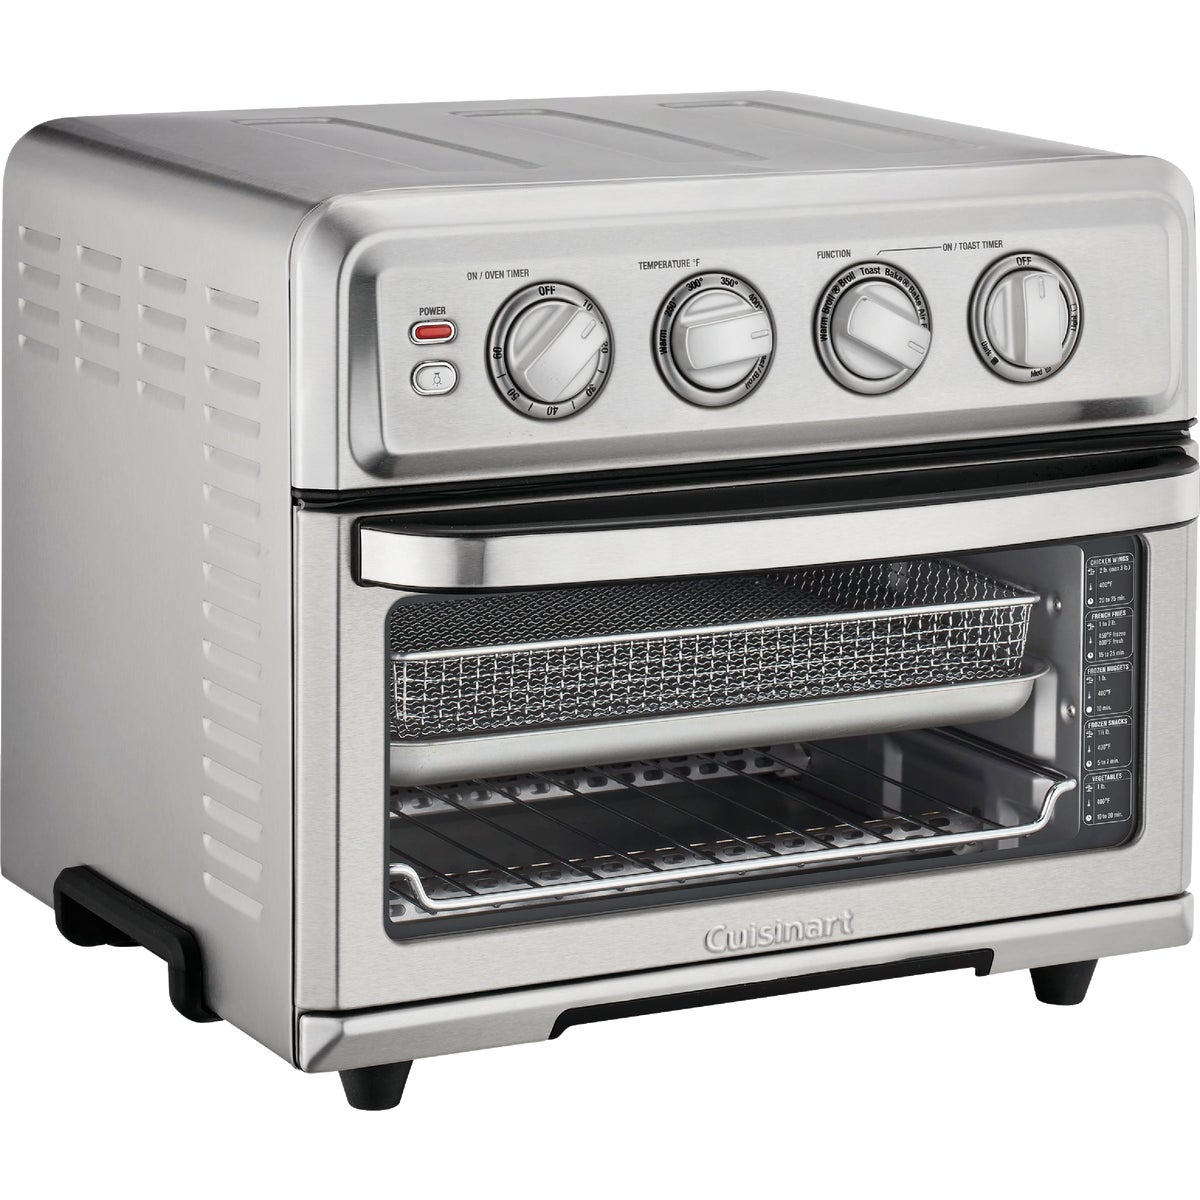 Item 603098, Premium full-size toaster oven with a built-in airfryer has 8 functions: 